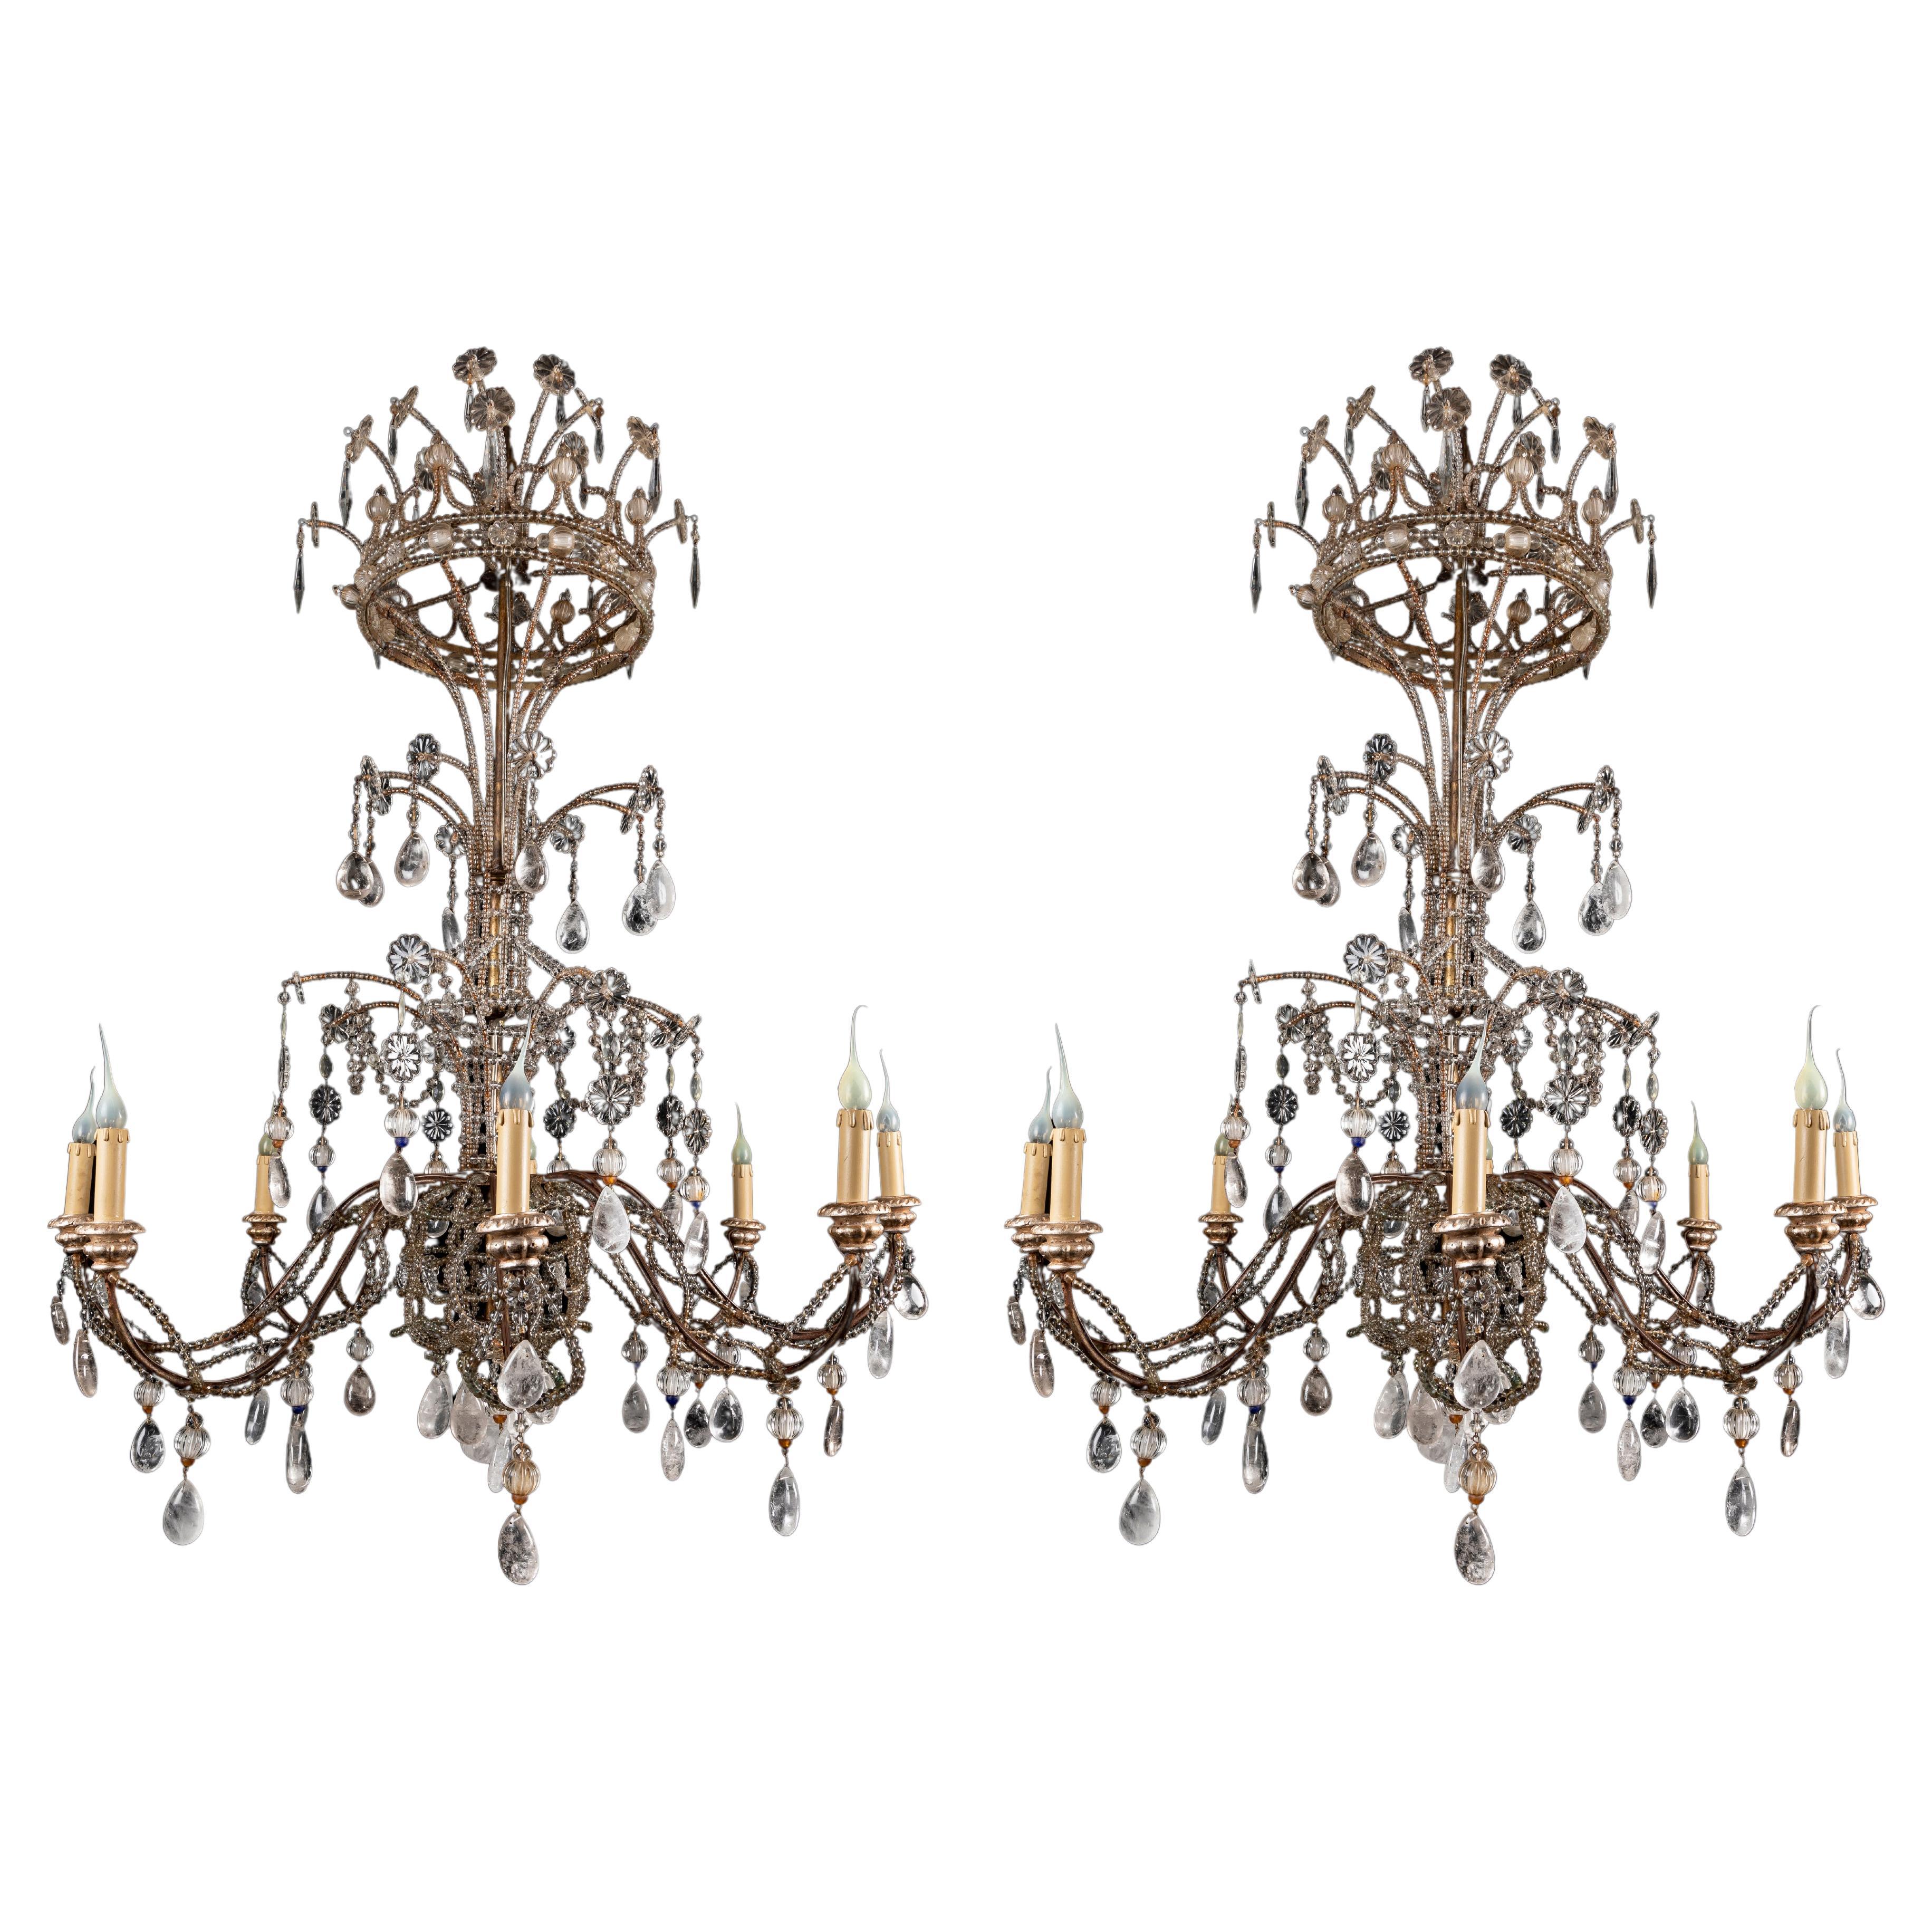 A Pair of Large Maison Bagues Rock Crystal Chandeliers For Sale